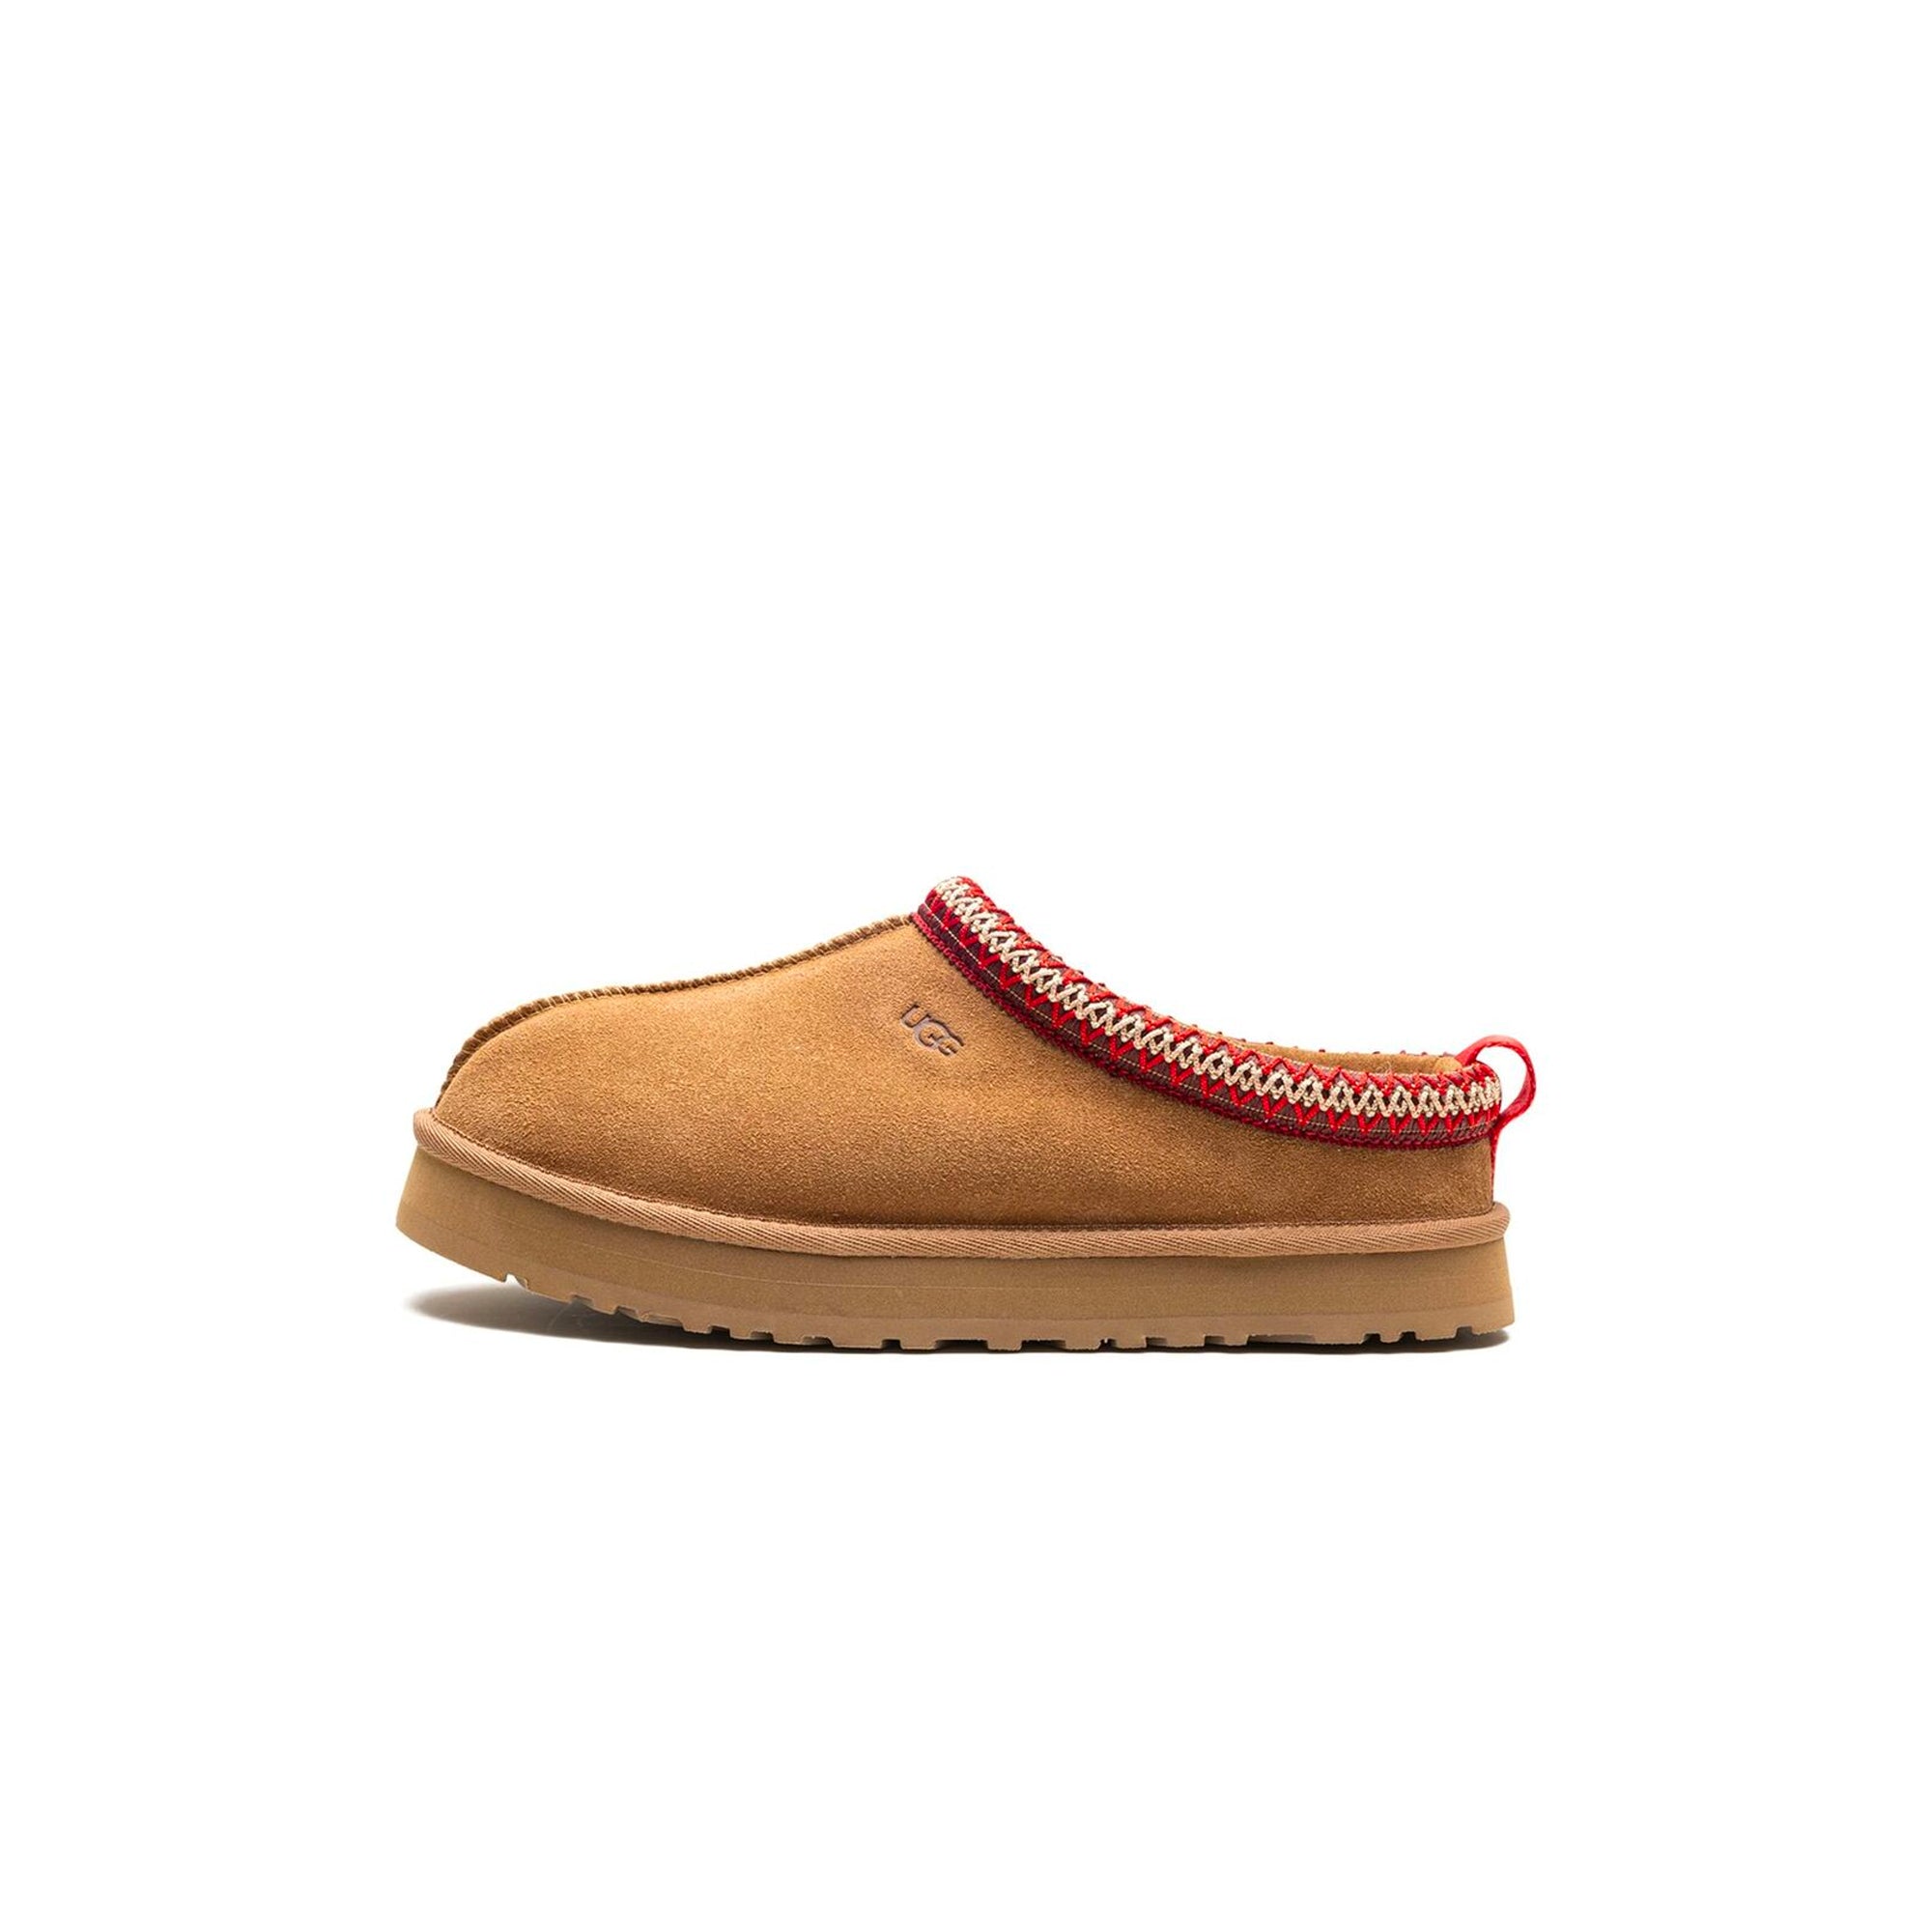 Ugg Kids Tazz Shoes